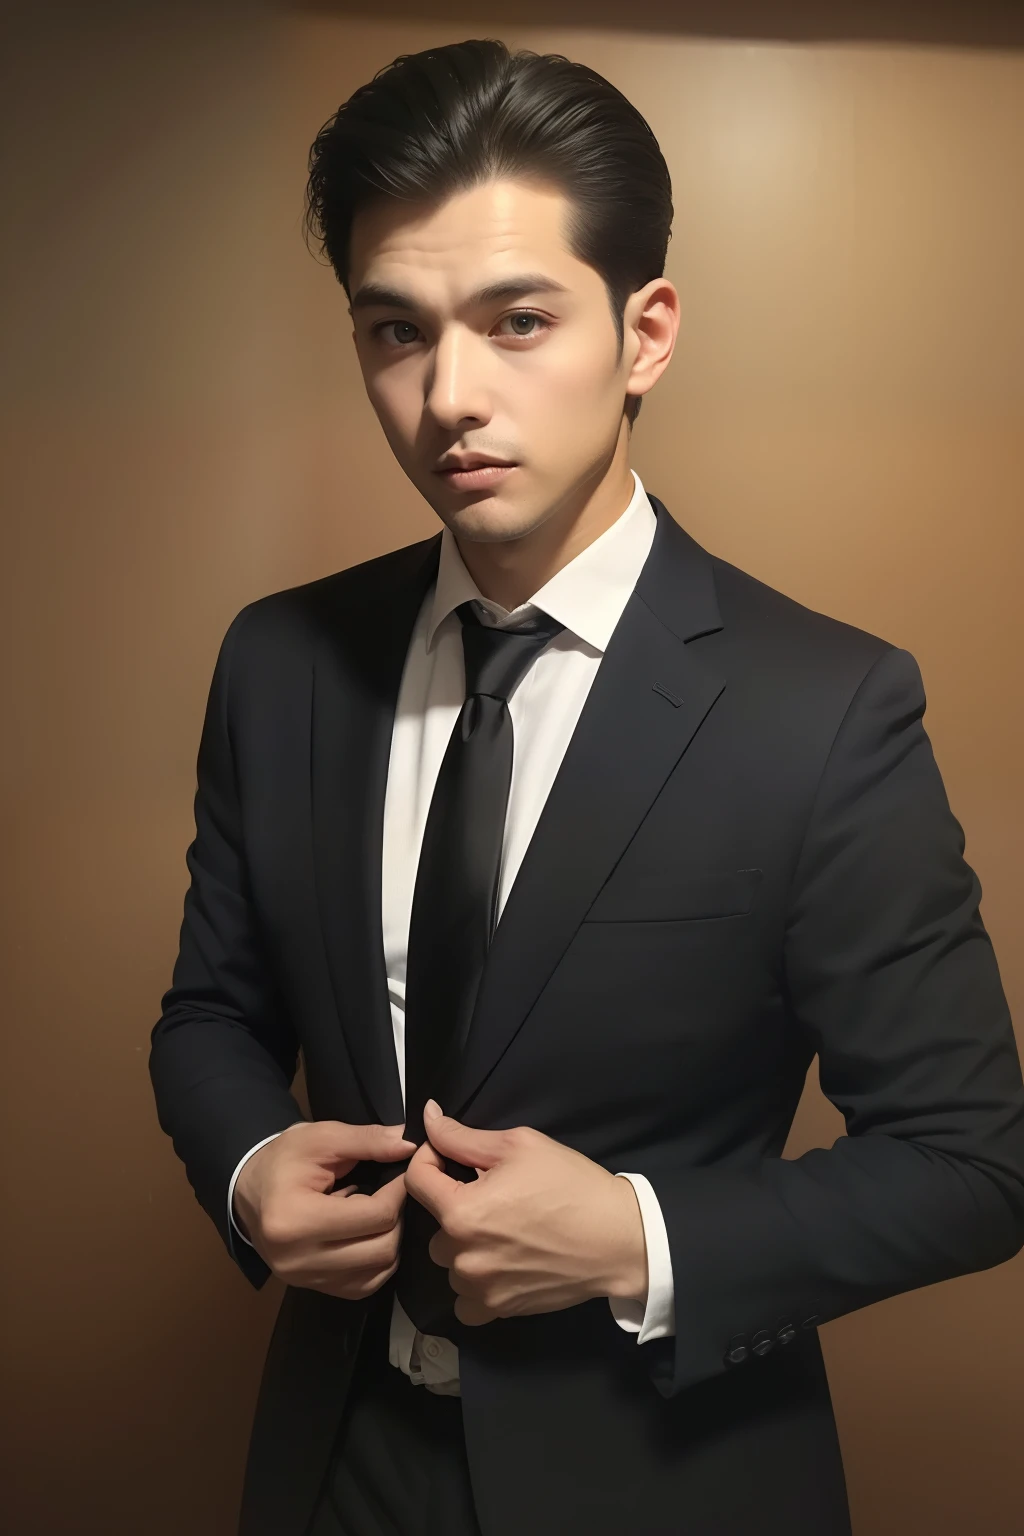 Black suit coat， 18k, {{Masterpiece}}, Best quality, High quality:1.4), simplebackground，（（（brown background））），，{{[[front look}}, Photo pose)]], very pretty look face, And very nice red eyes, 1人, Solo, Portrait of Habibnul Magomedov in a suit and tie, Beard, Serious, Details, Realistic, Photography, The background is blurred out, soft focus